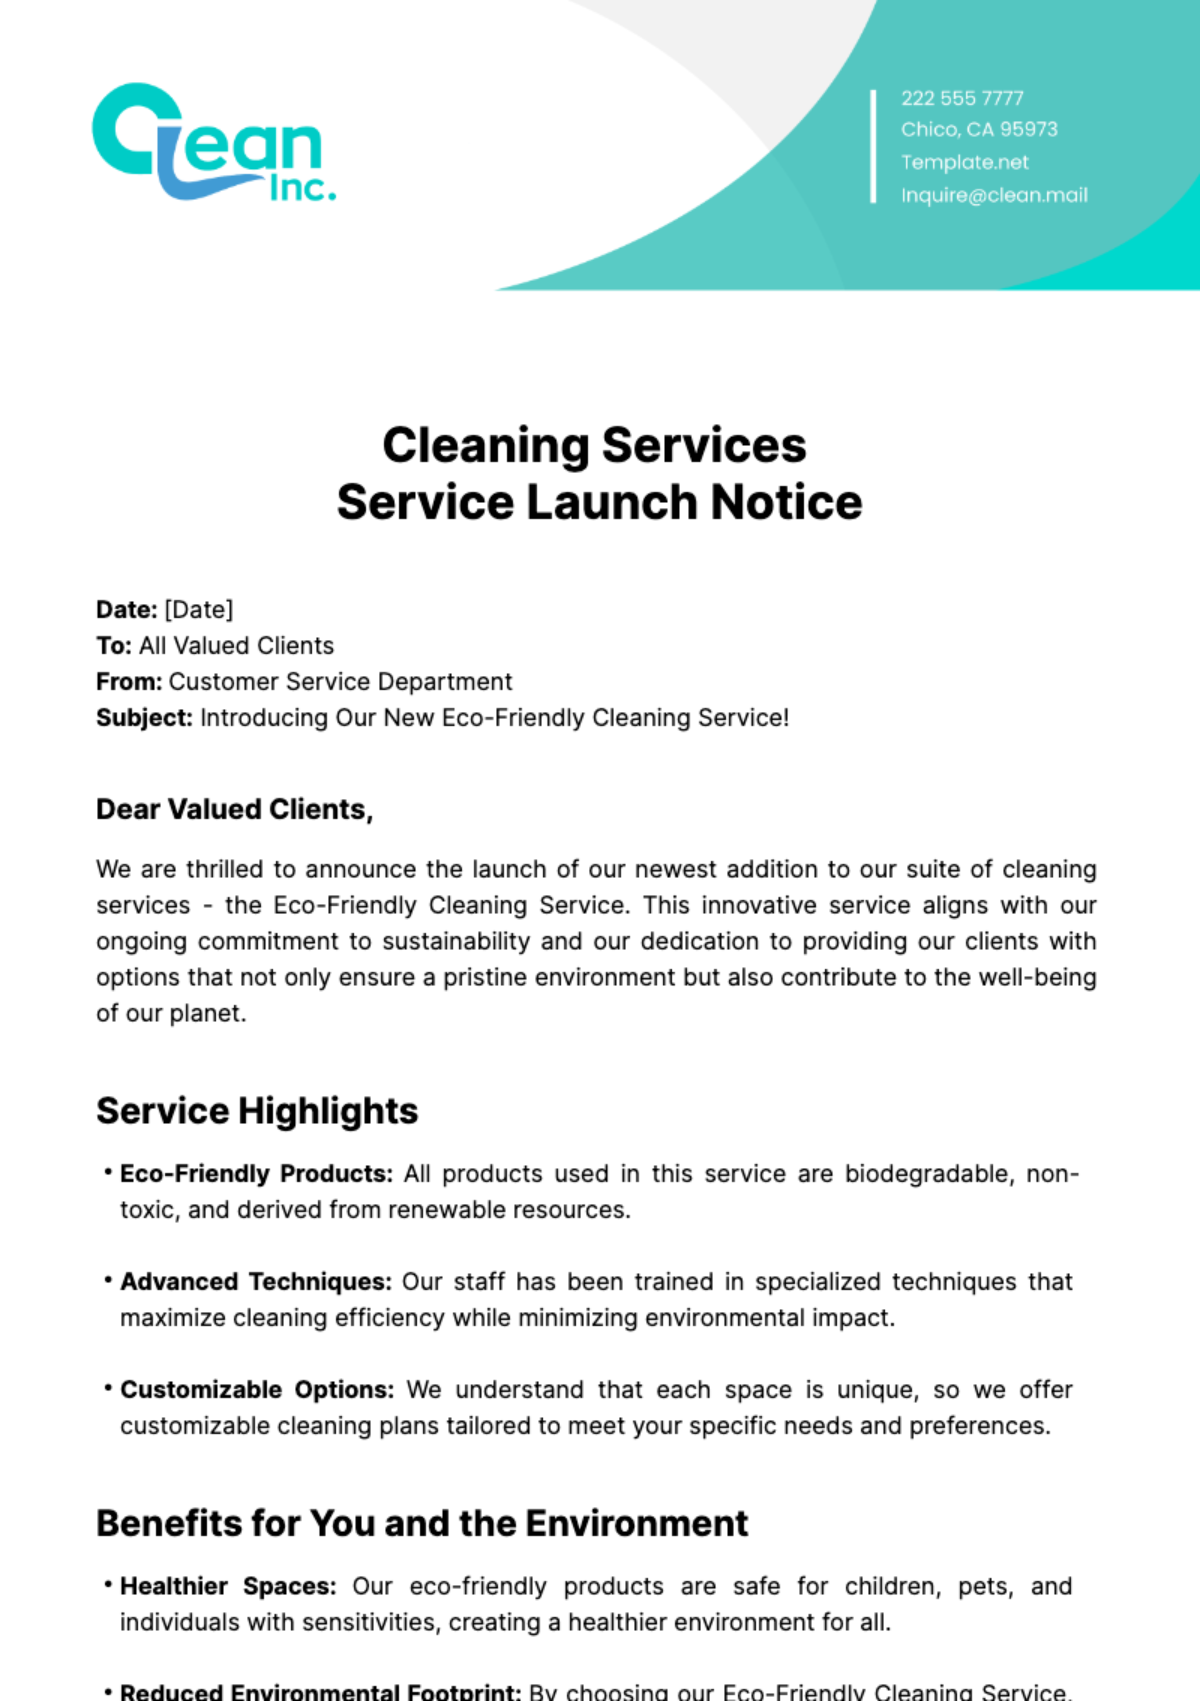 Cleaning Services Service Launch Notice Template